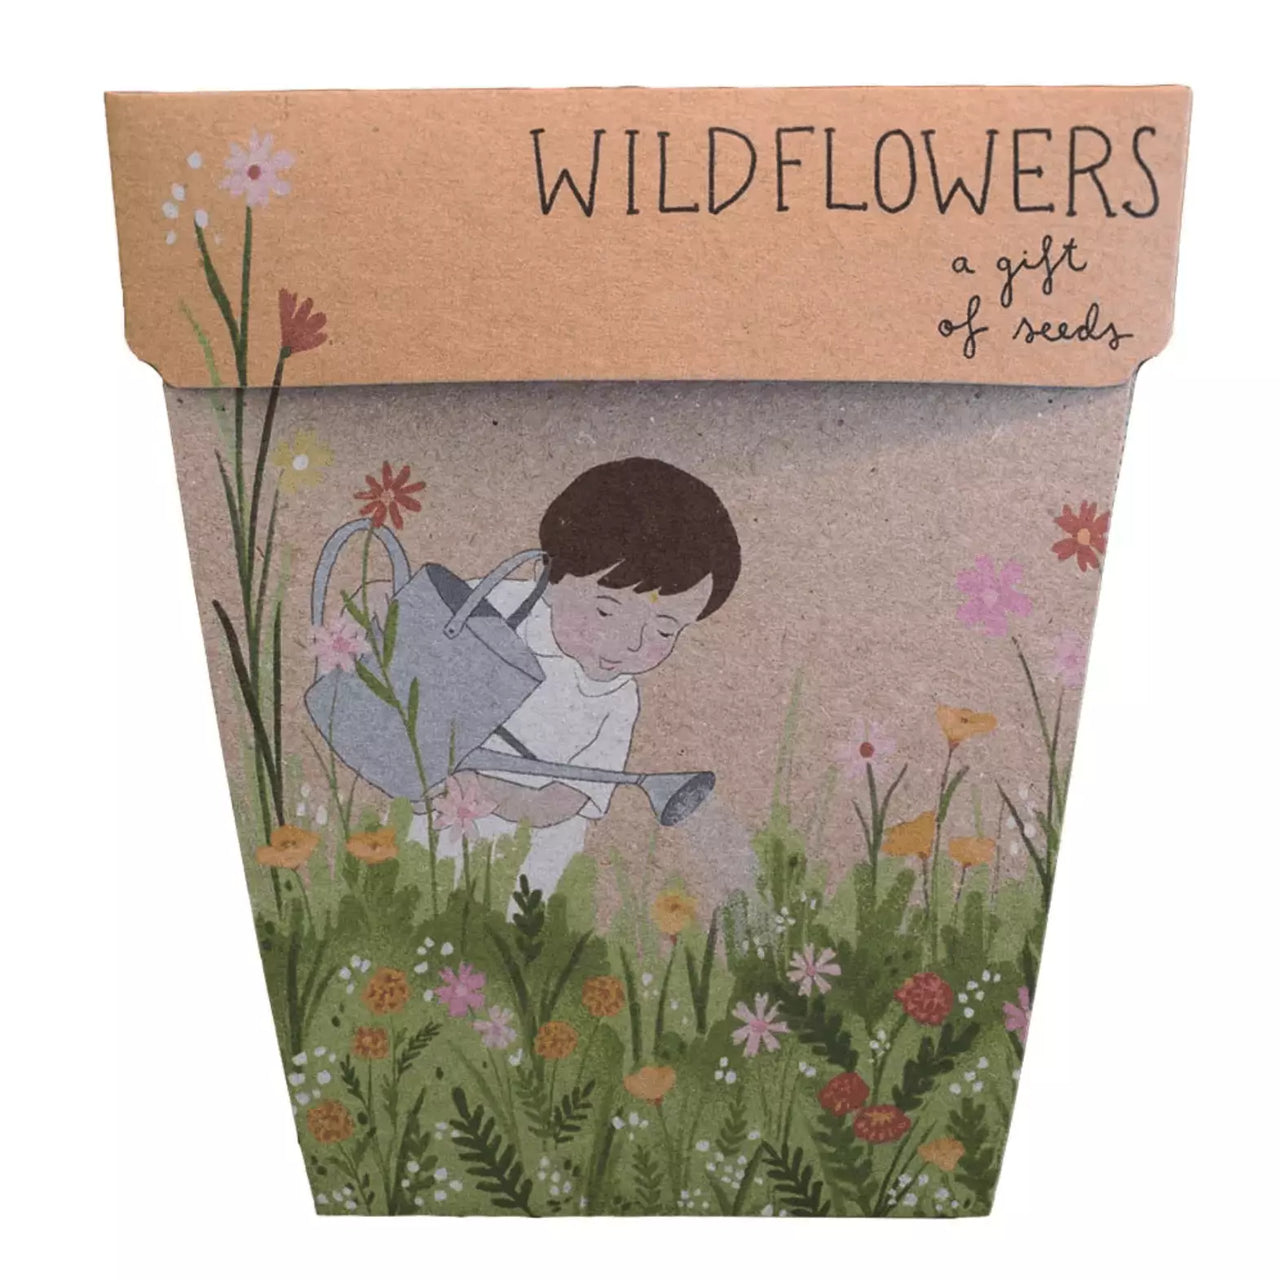 Sow n Sow Wildflowers - a gift of nature.